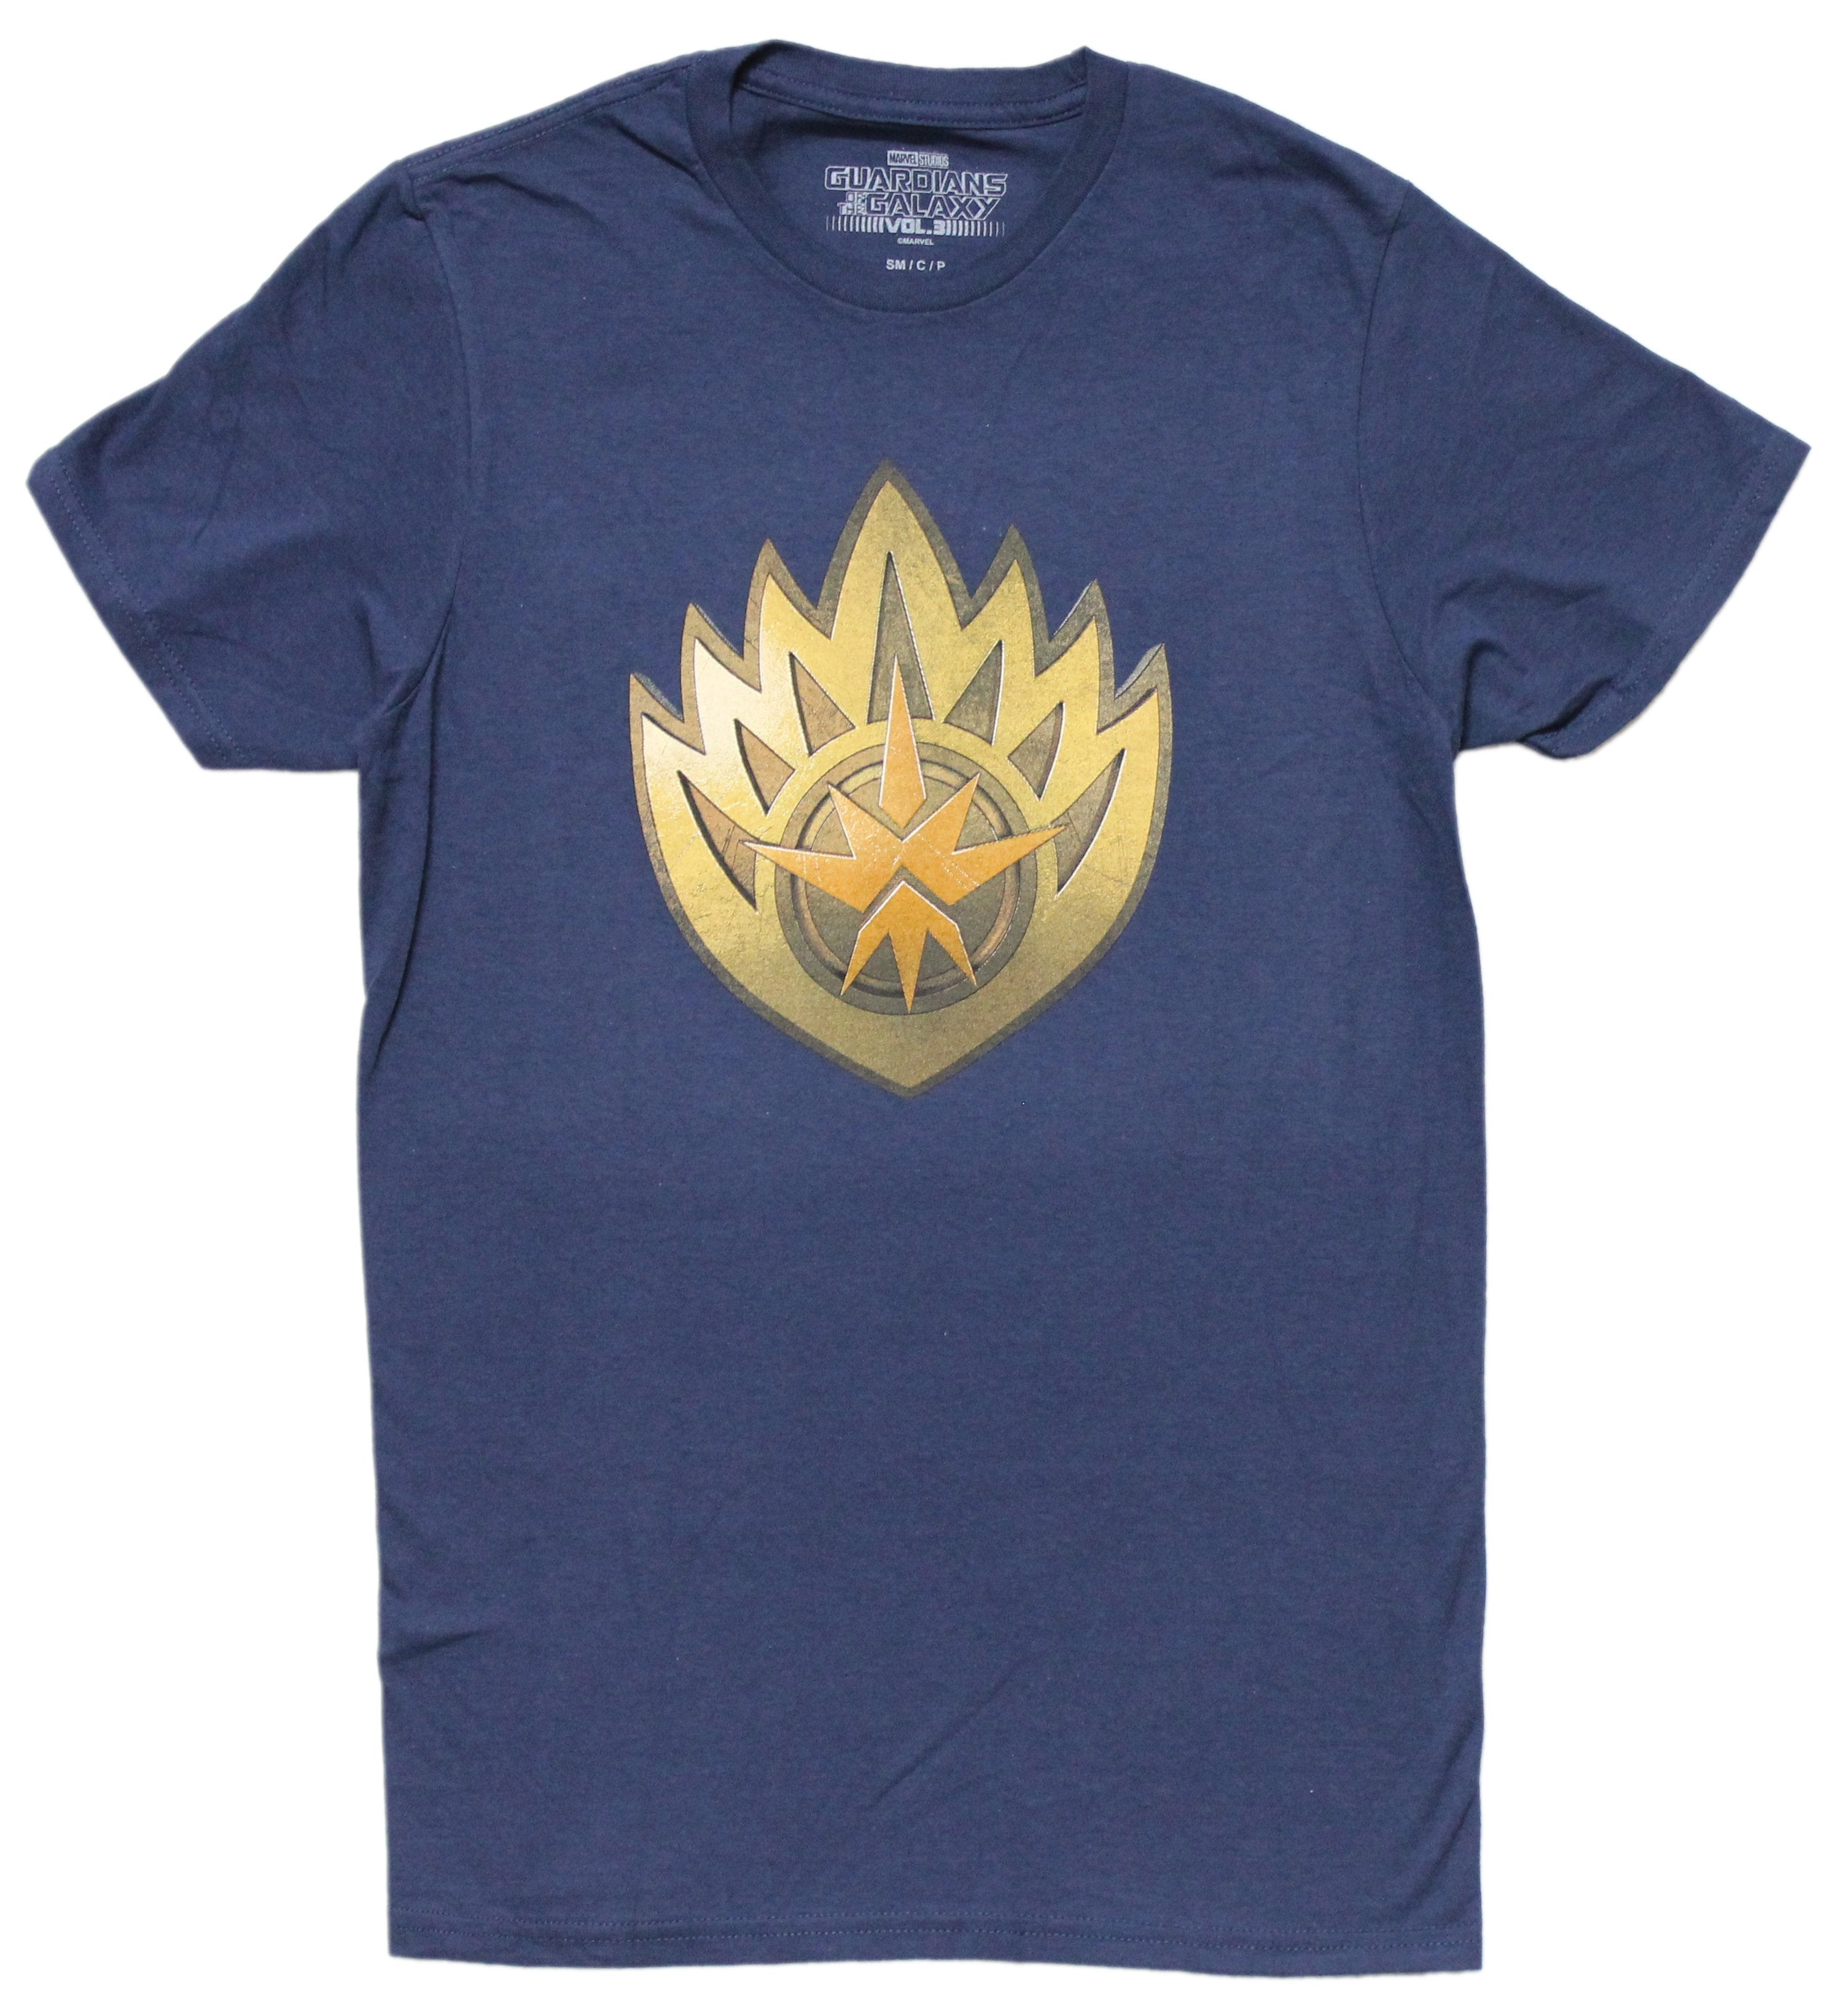 Guardians of the Galaxy Mens T-Shirt - Star Lord  Flame Insignia